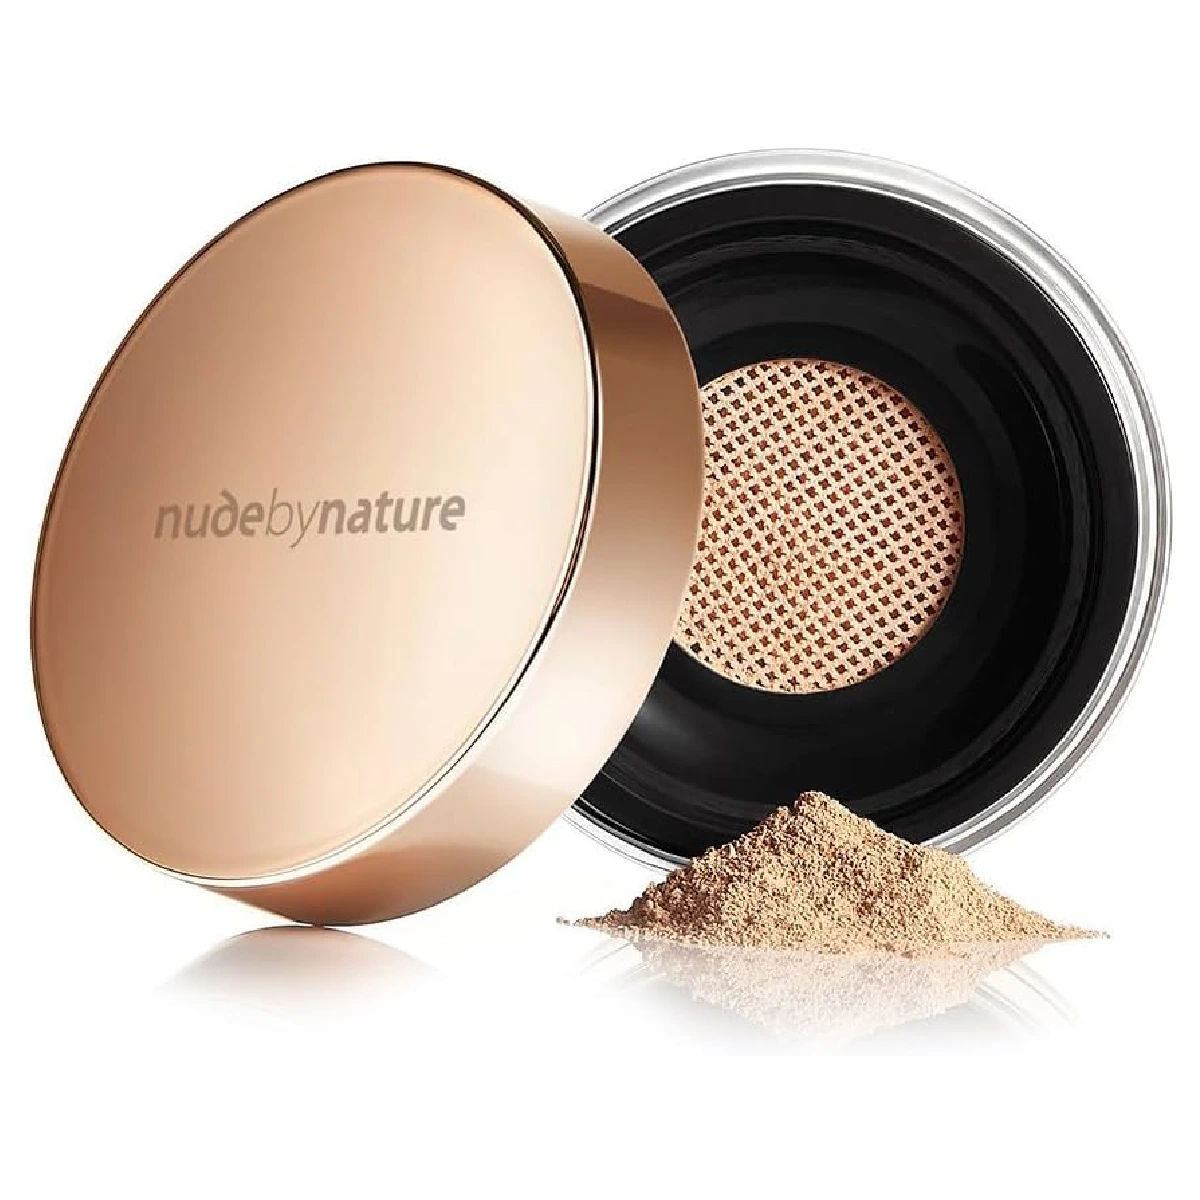 Nude by Nature Radiant Loose Powder Foundation container displayed elegantly.